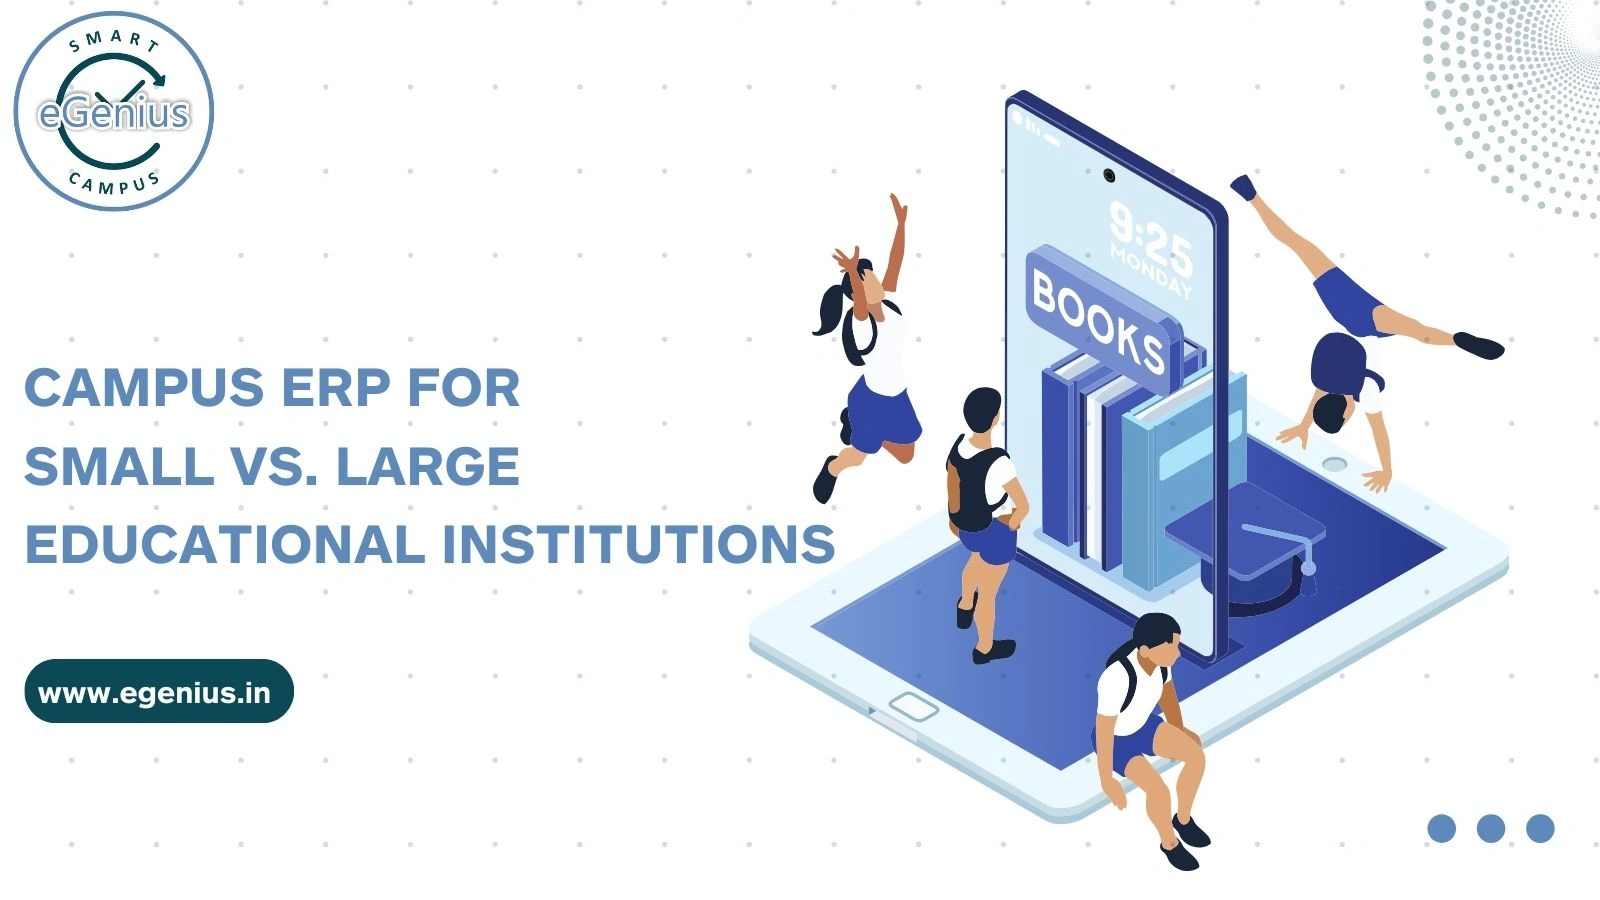 Campus ERP for Small vs. Large Educational Institutions